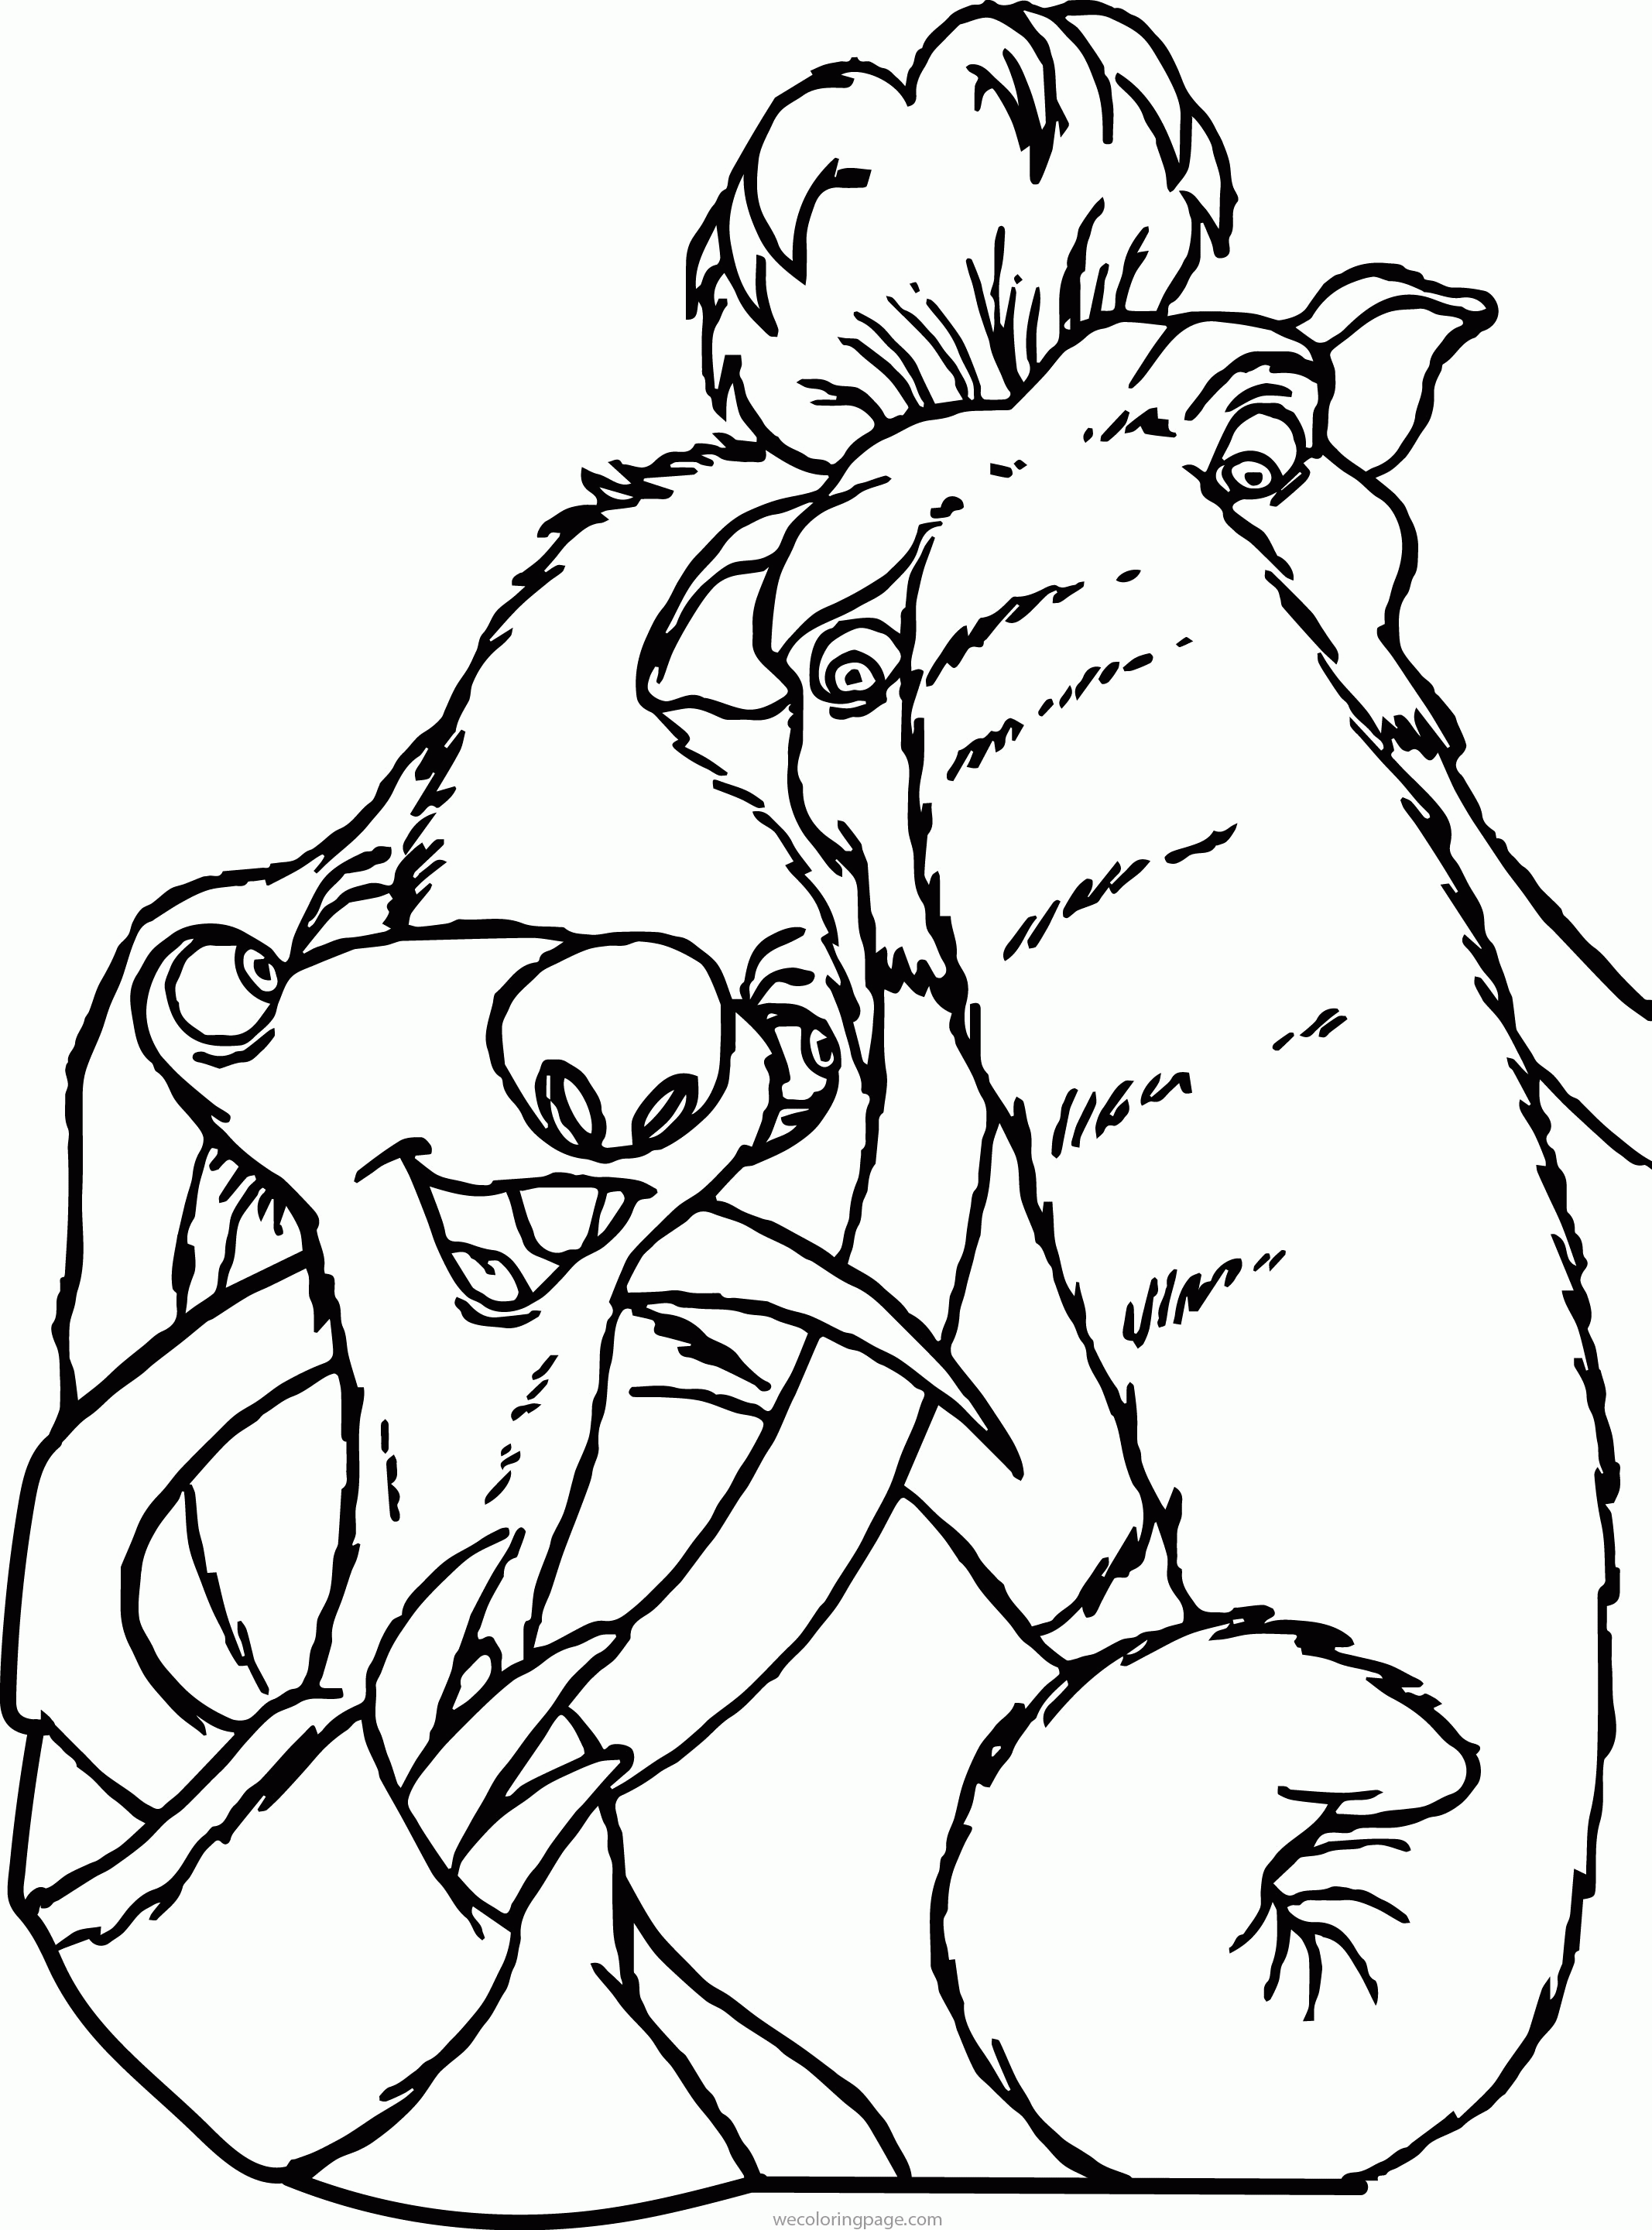 Ice Age Coloring Pages | Wecoloringpage